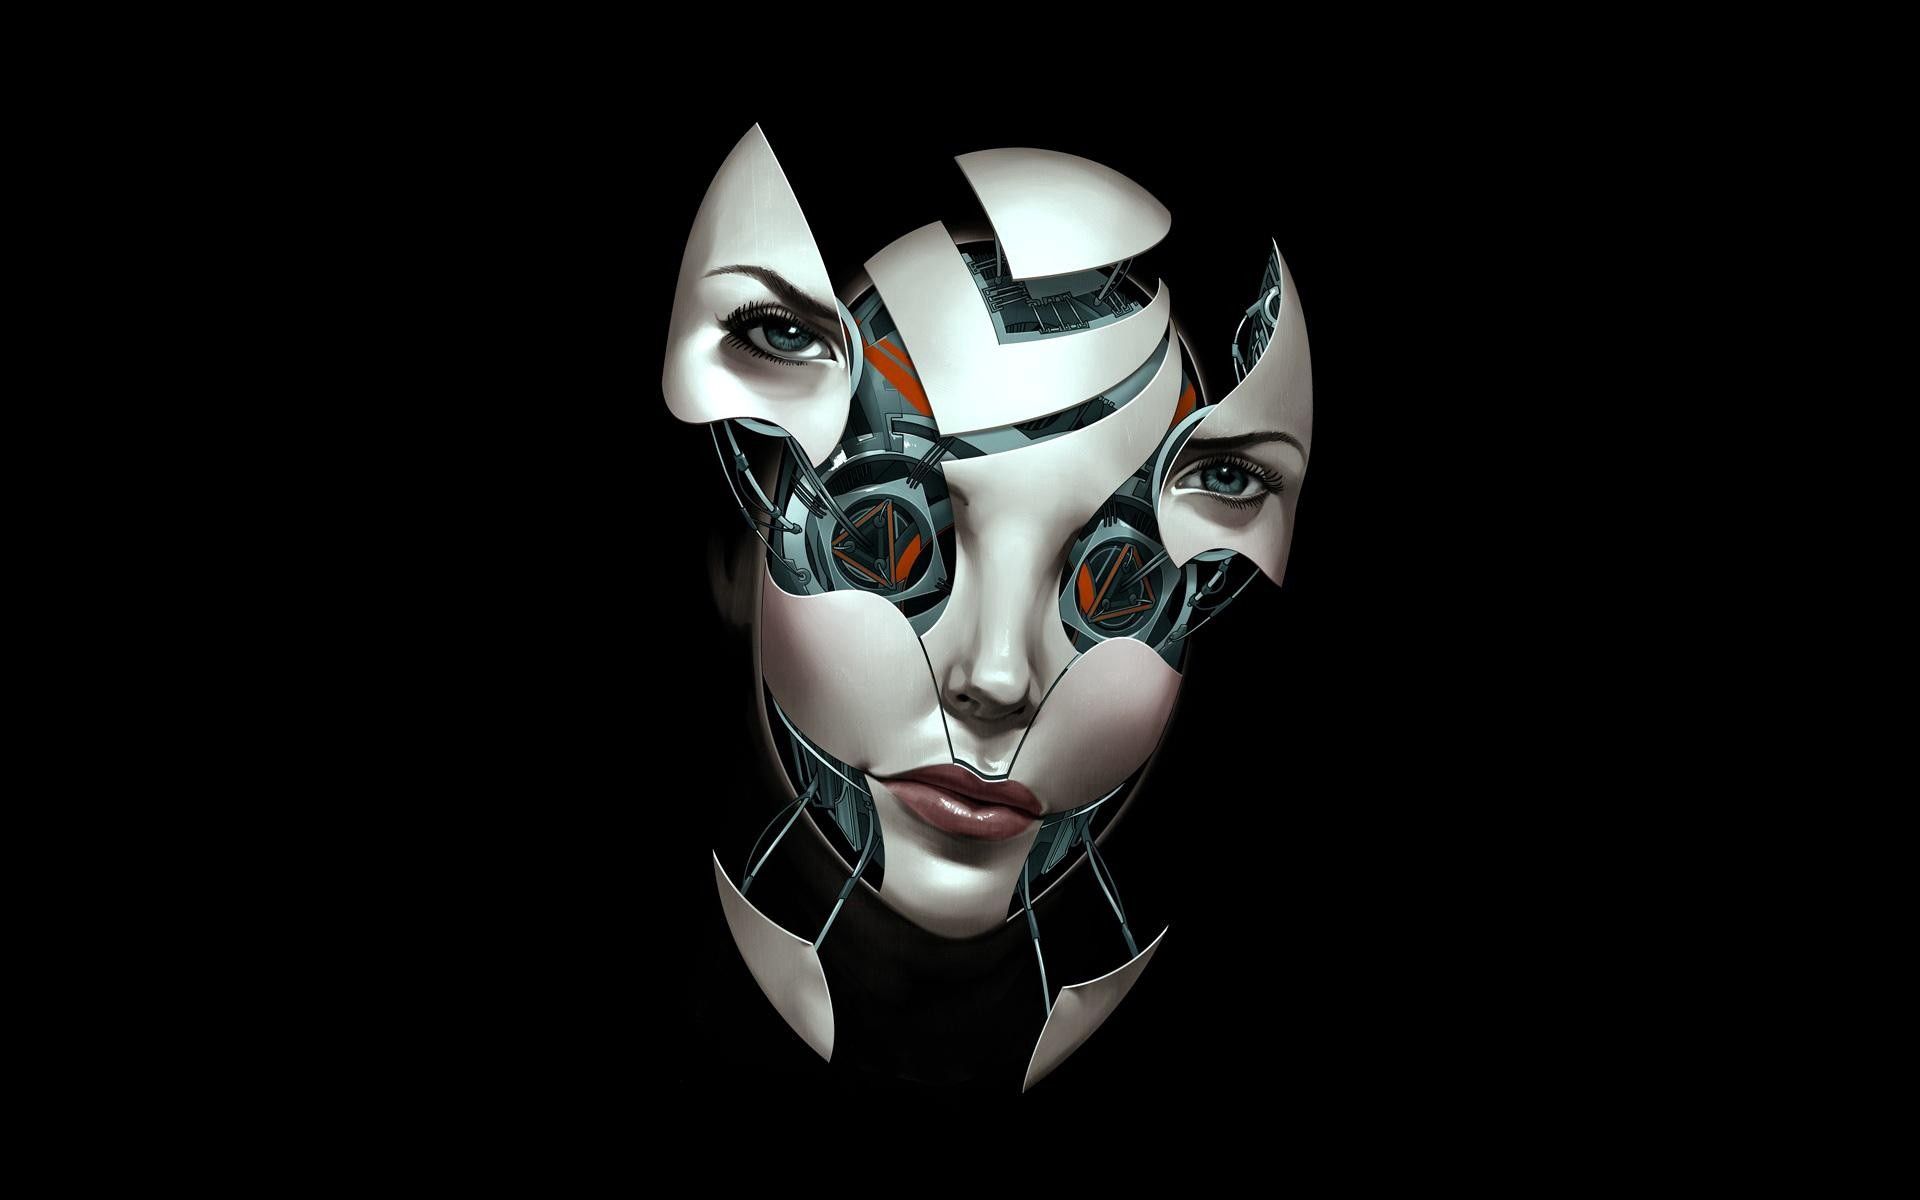 robot, abstract, face, dark background, shards, smithereens, compound UHD